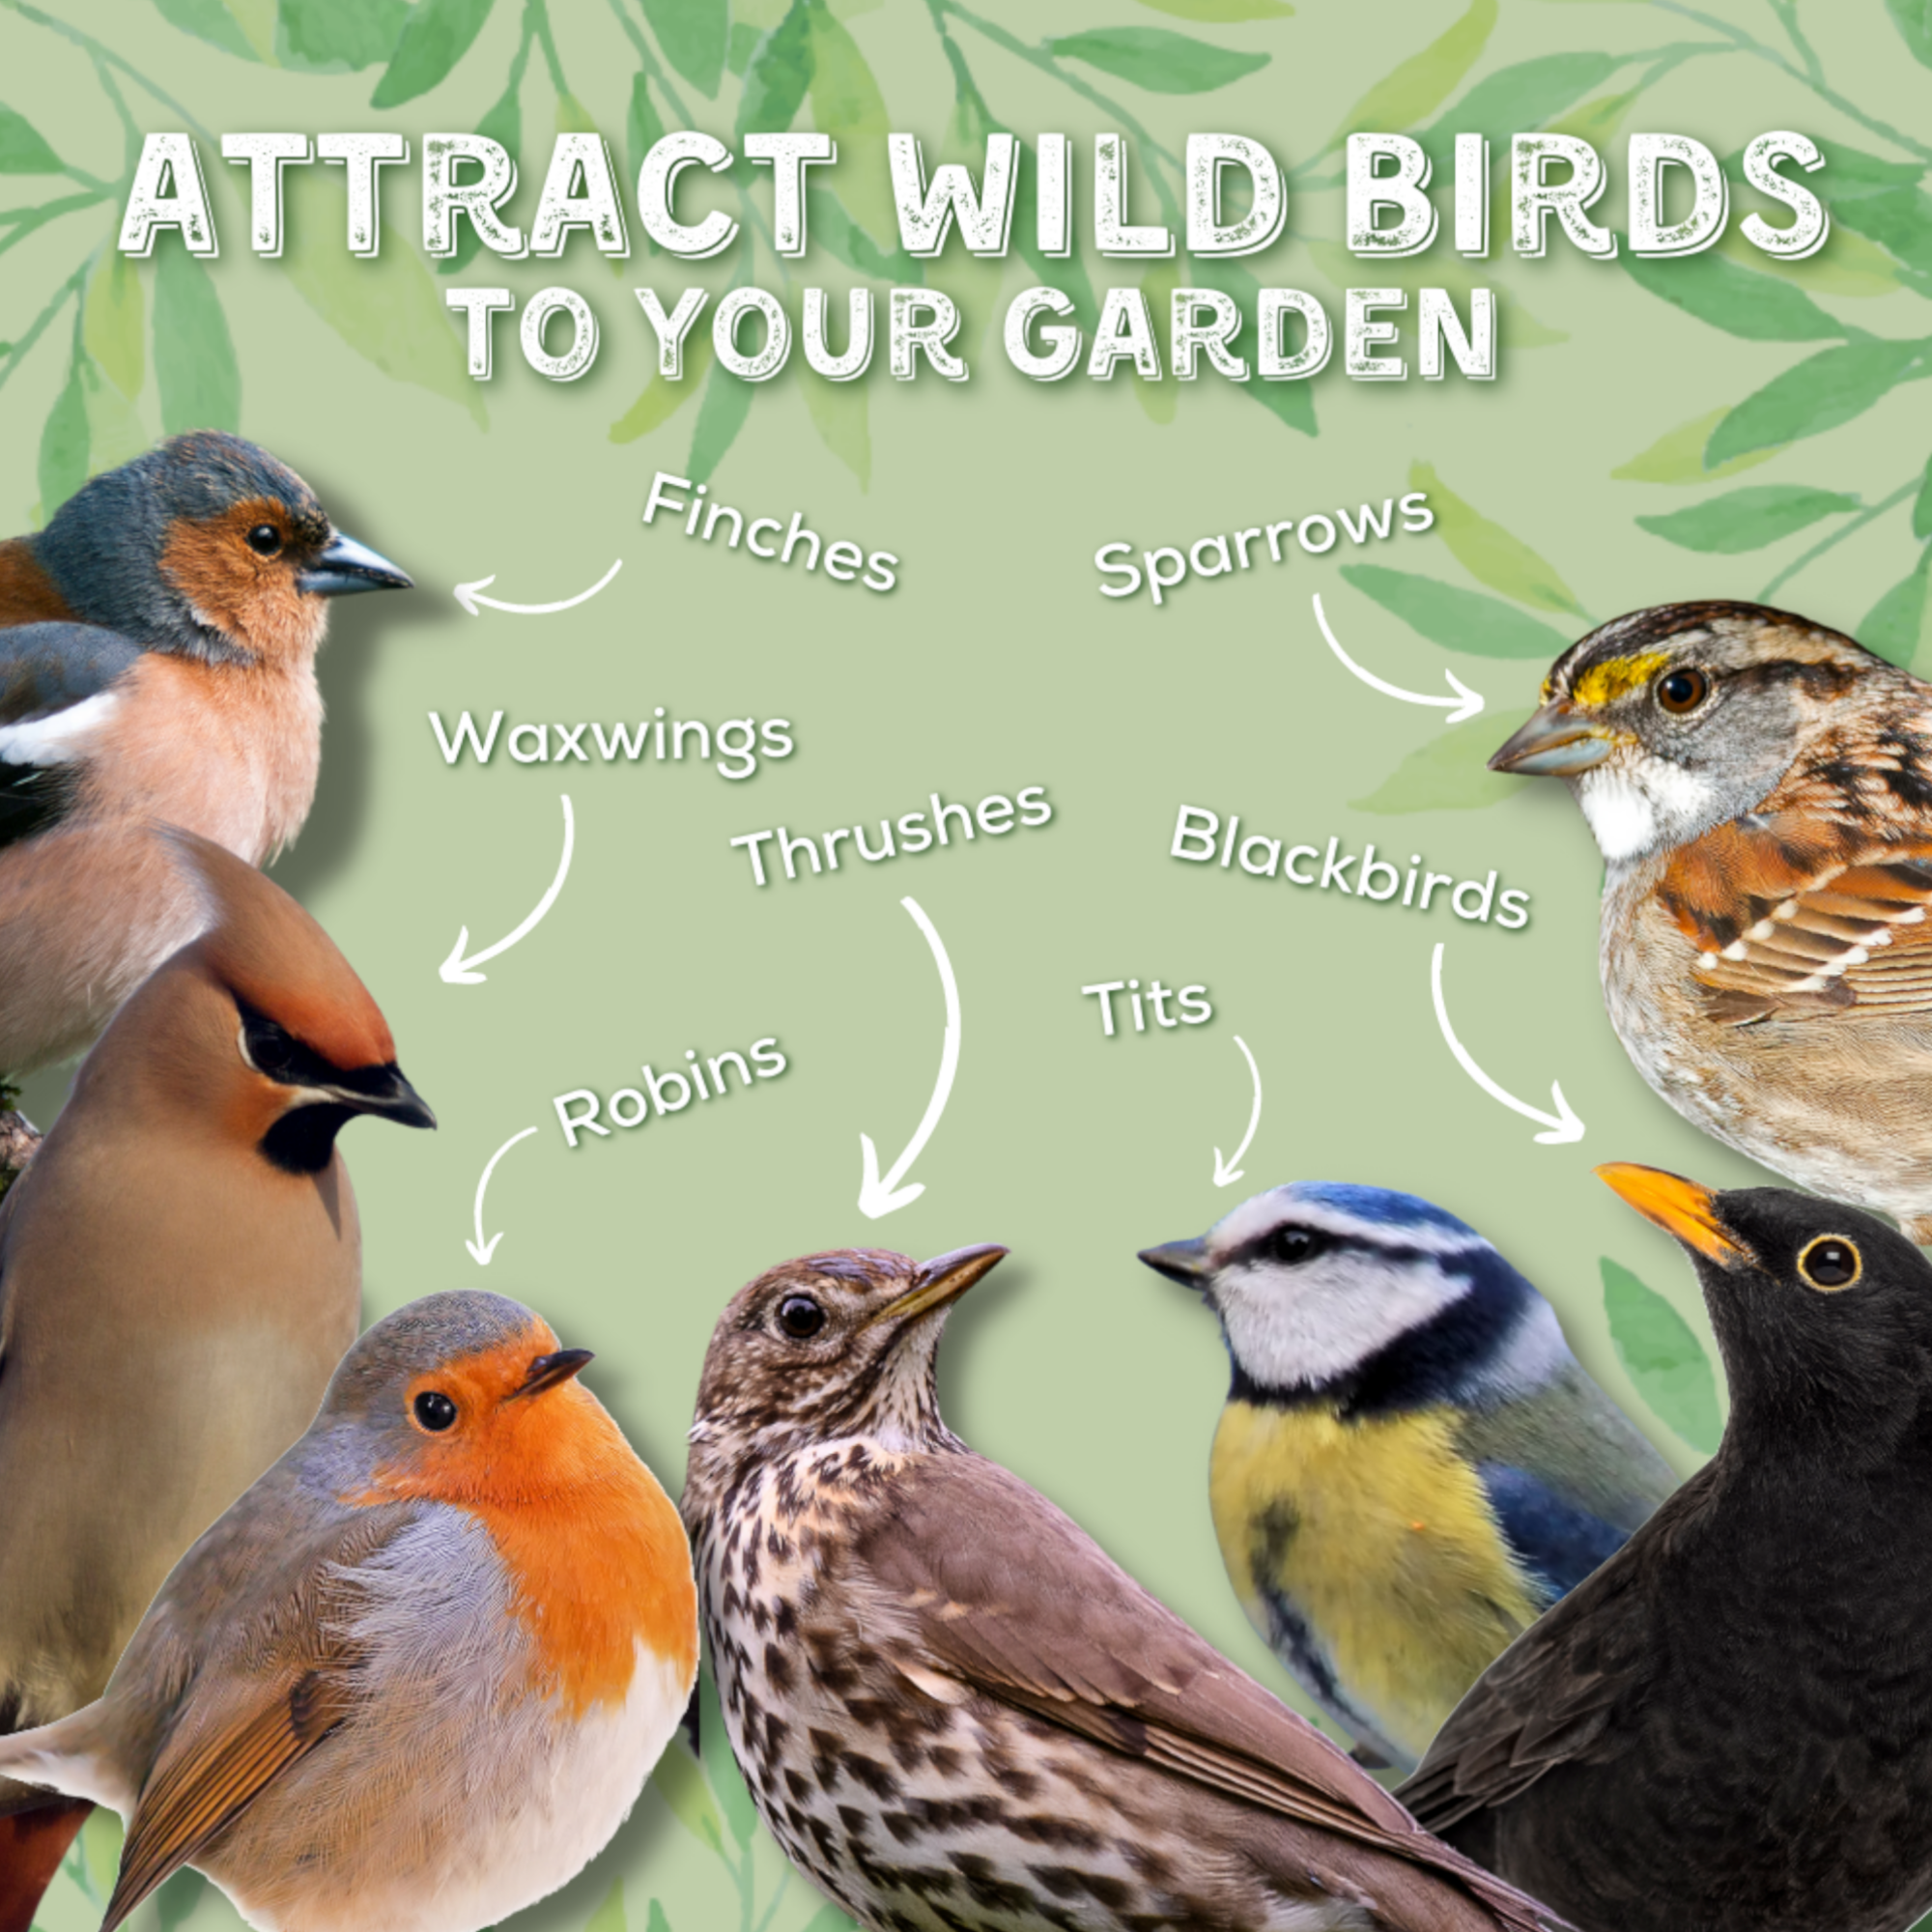 Attract Wild Birds To Your Garden: Finches, Sparrows, Waxwings, Thrushes, Blackbirds, Robins, Tits